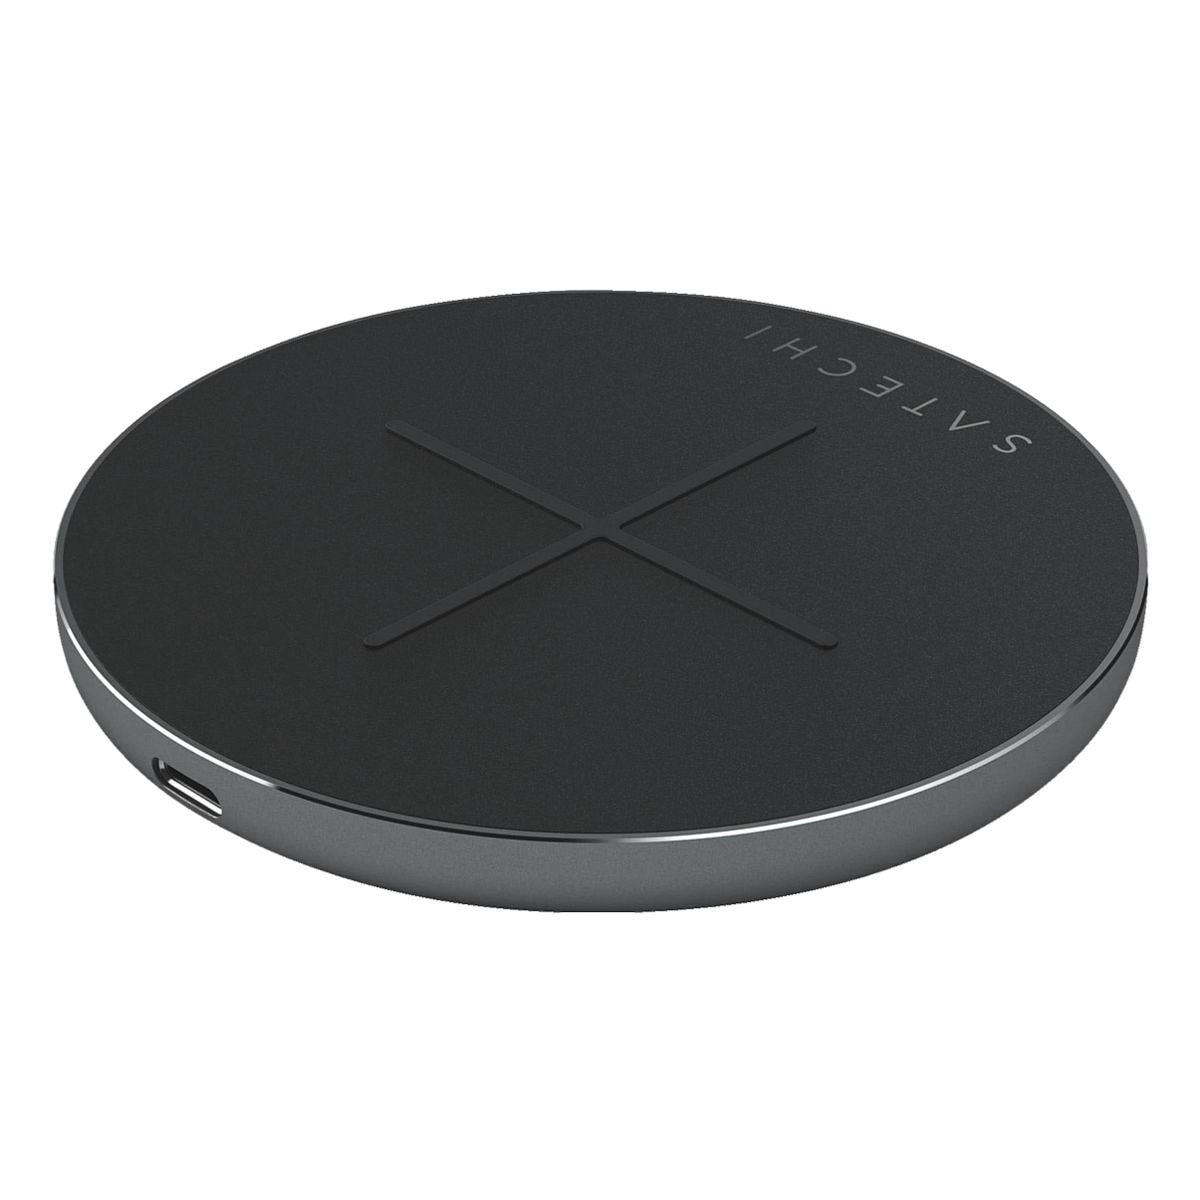 Satechi Draadloze oplader Wireless Charger USB Type-C PD/QC